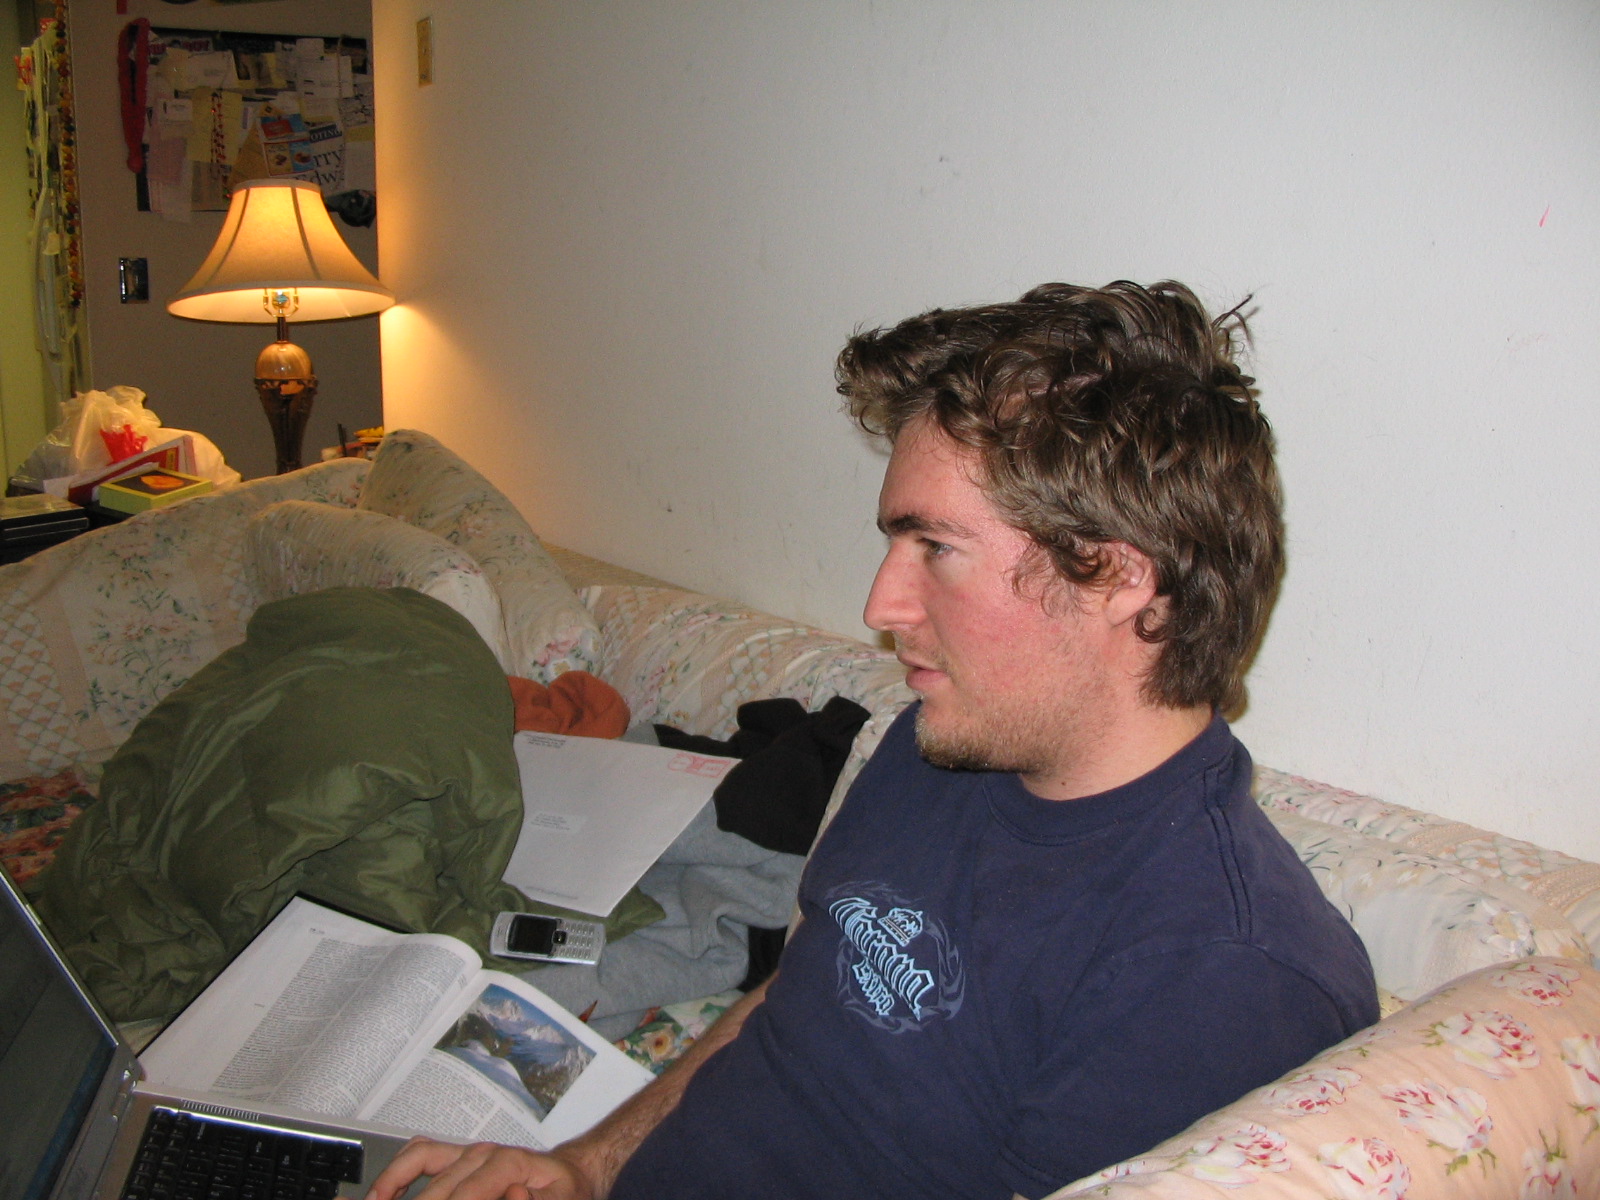 a man is sitting on the couch and looking into his laptop